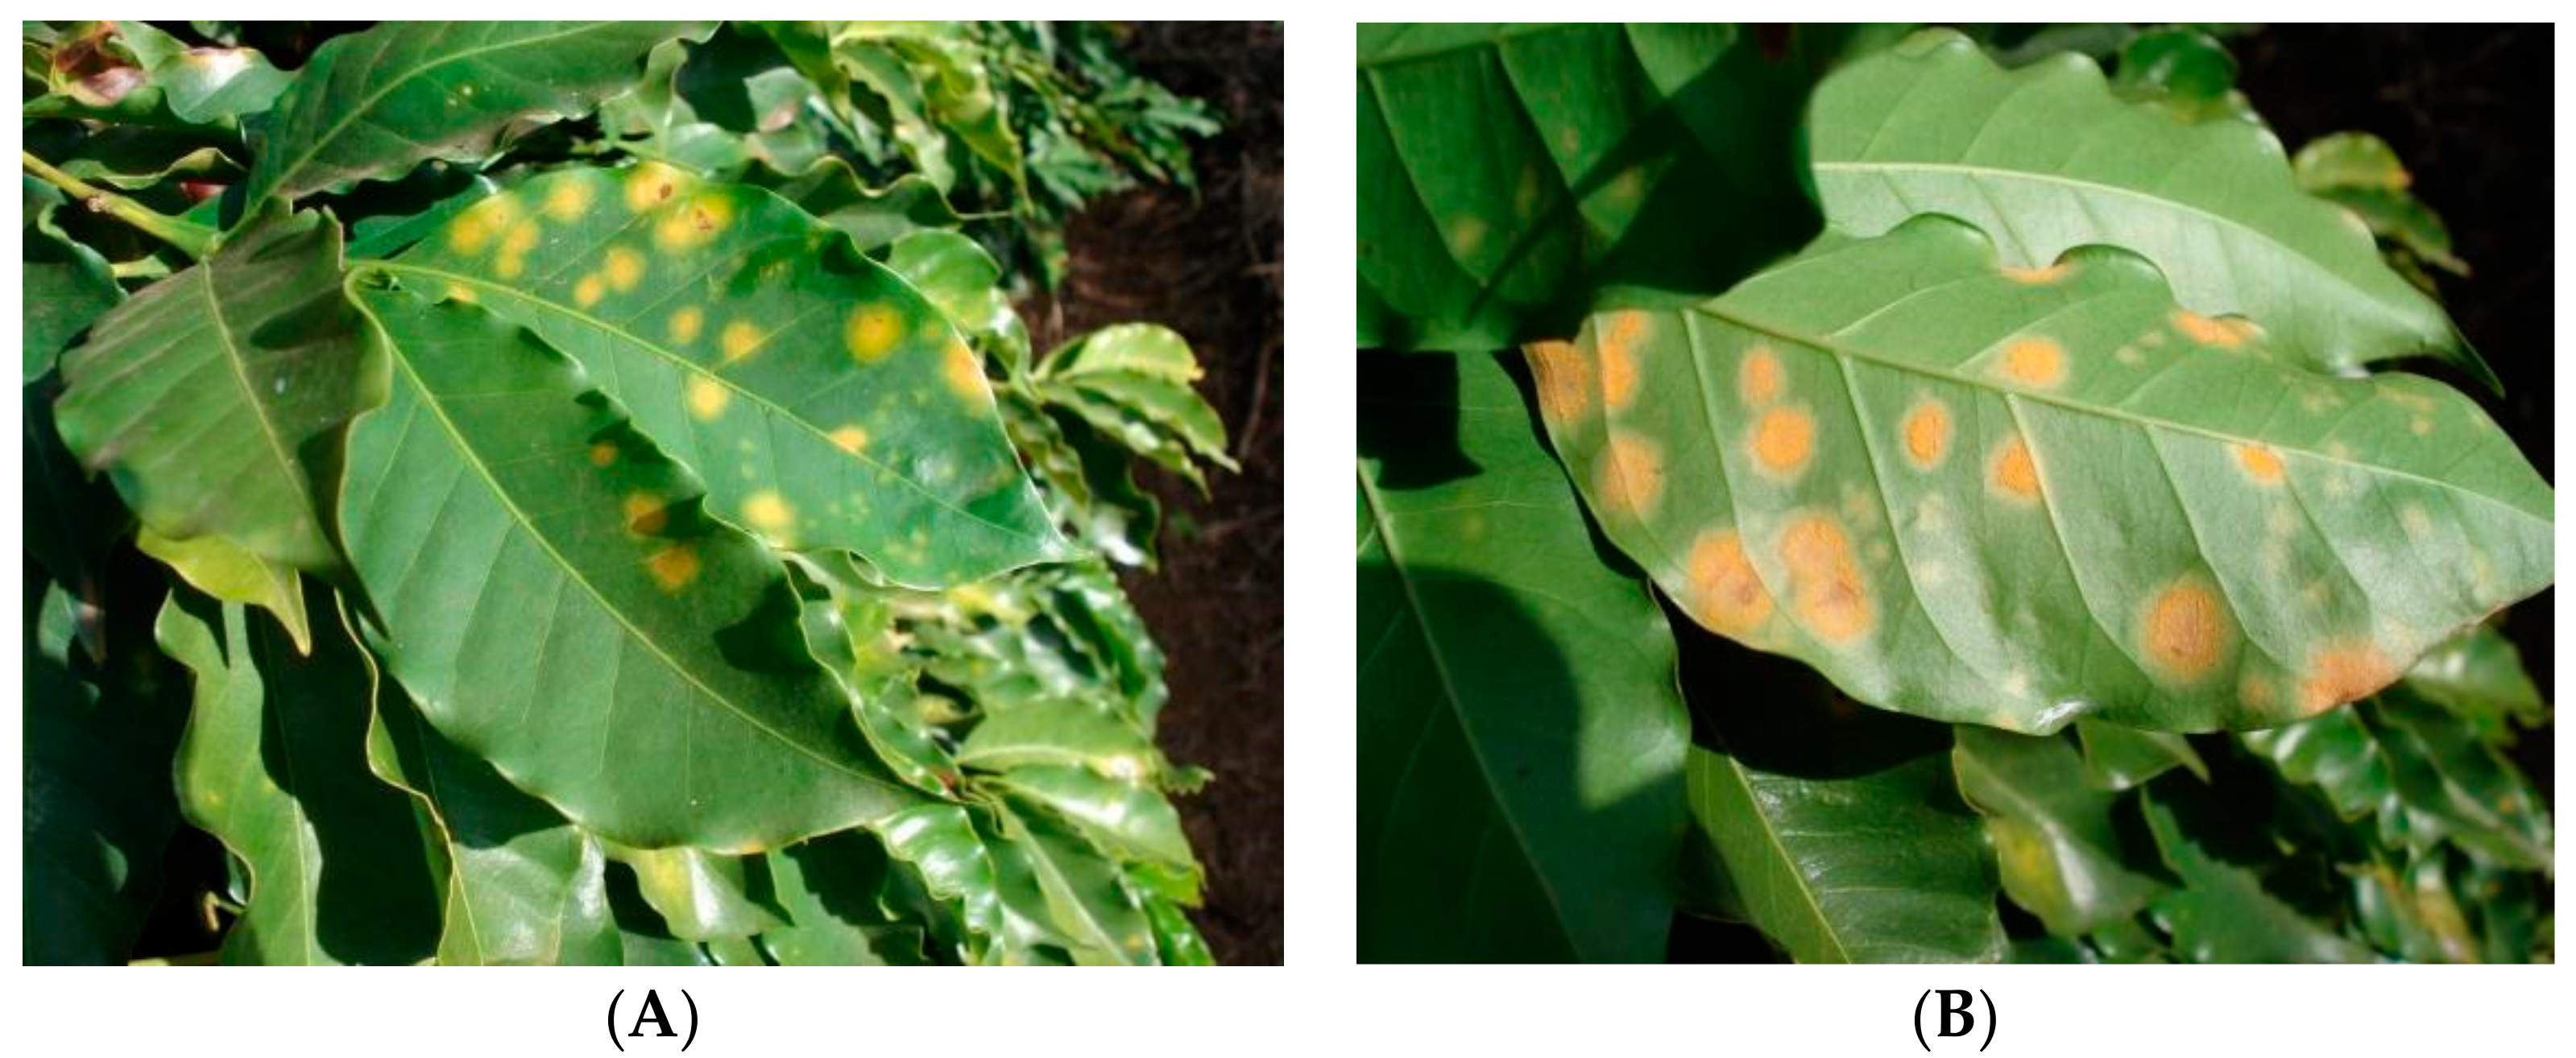 Agronomy | Free Full-Text | Coffee Leaf Rust in Brazil: Historical Events,  Current Situation, and Control Measures | HTML